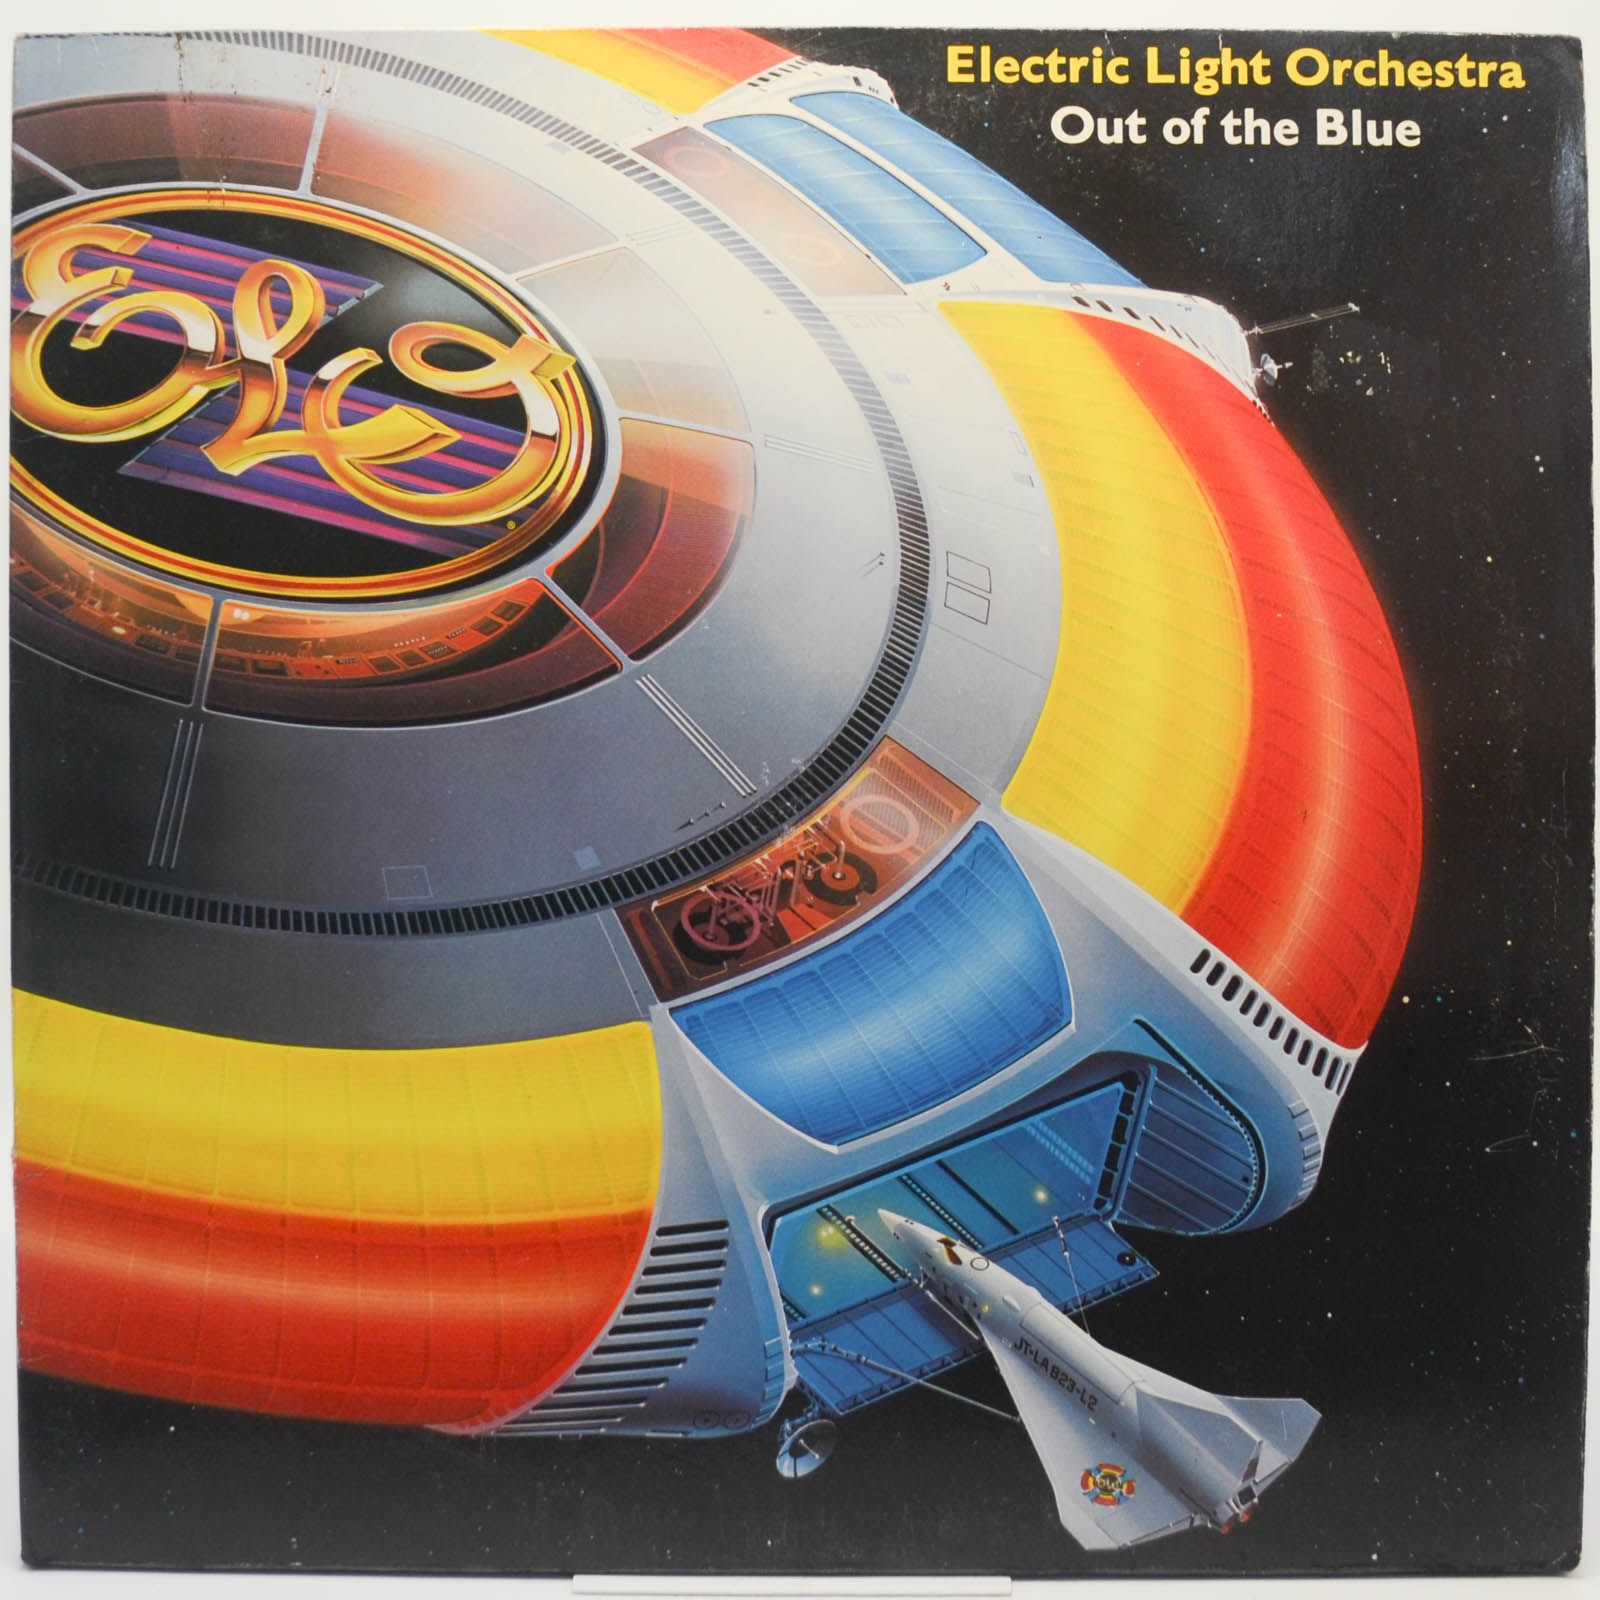 Electric Light Orchestra — Out Of The Blue (2LP, poster), 1977